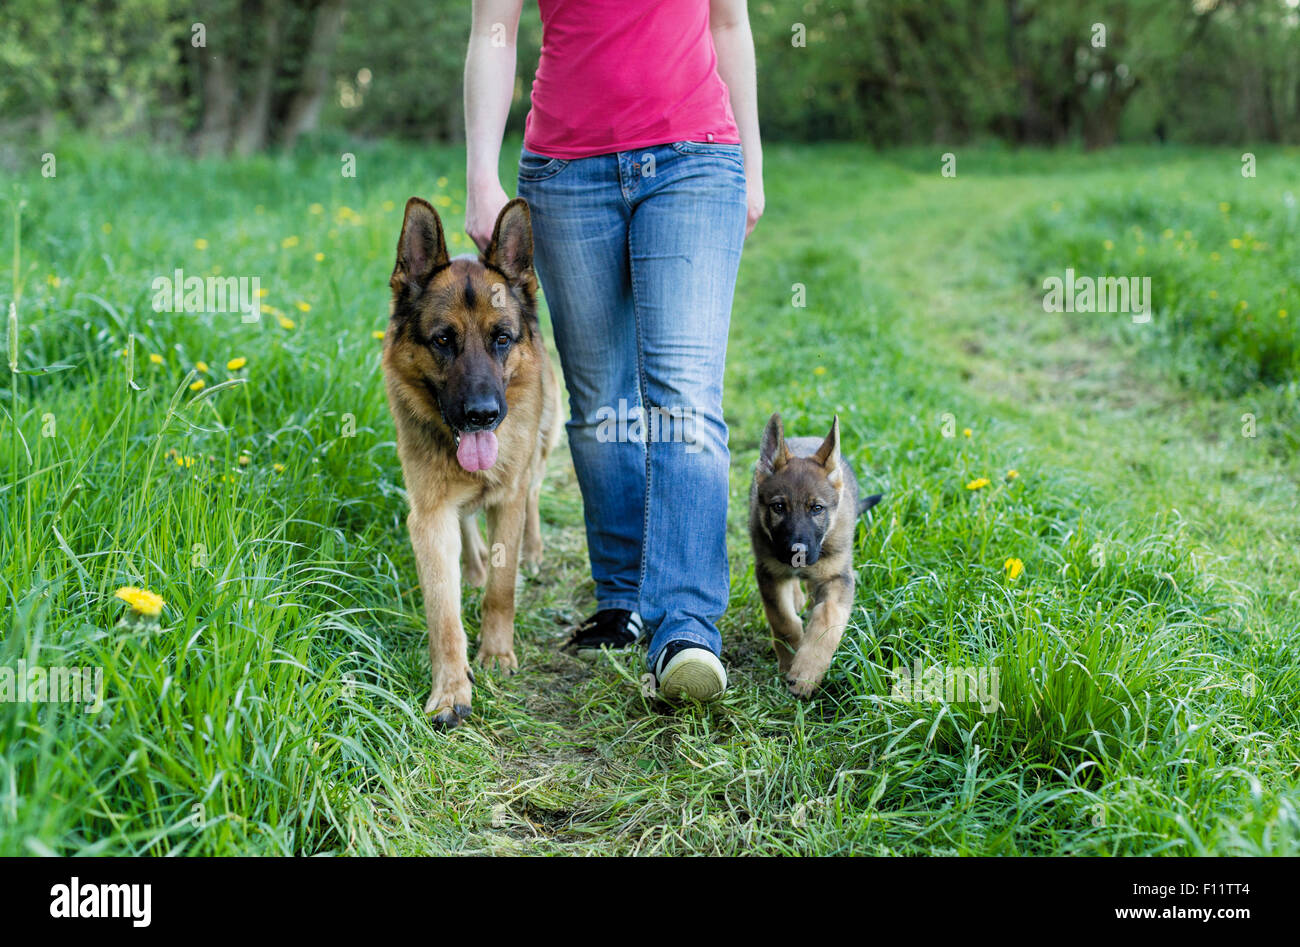 German Shepherd, Alsatian Puppy and adult dog walking next to person Stock Photo